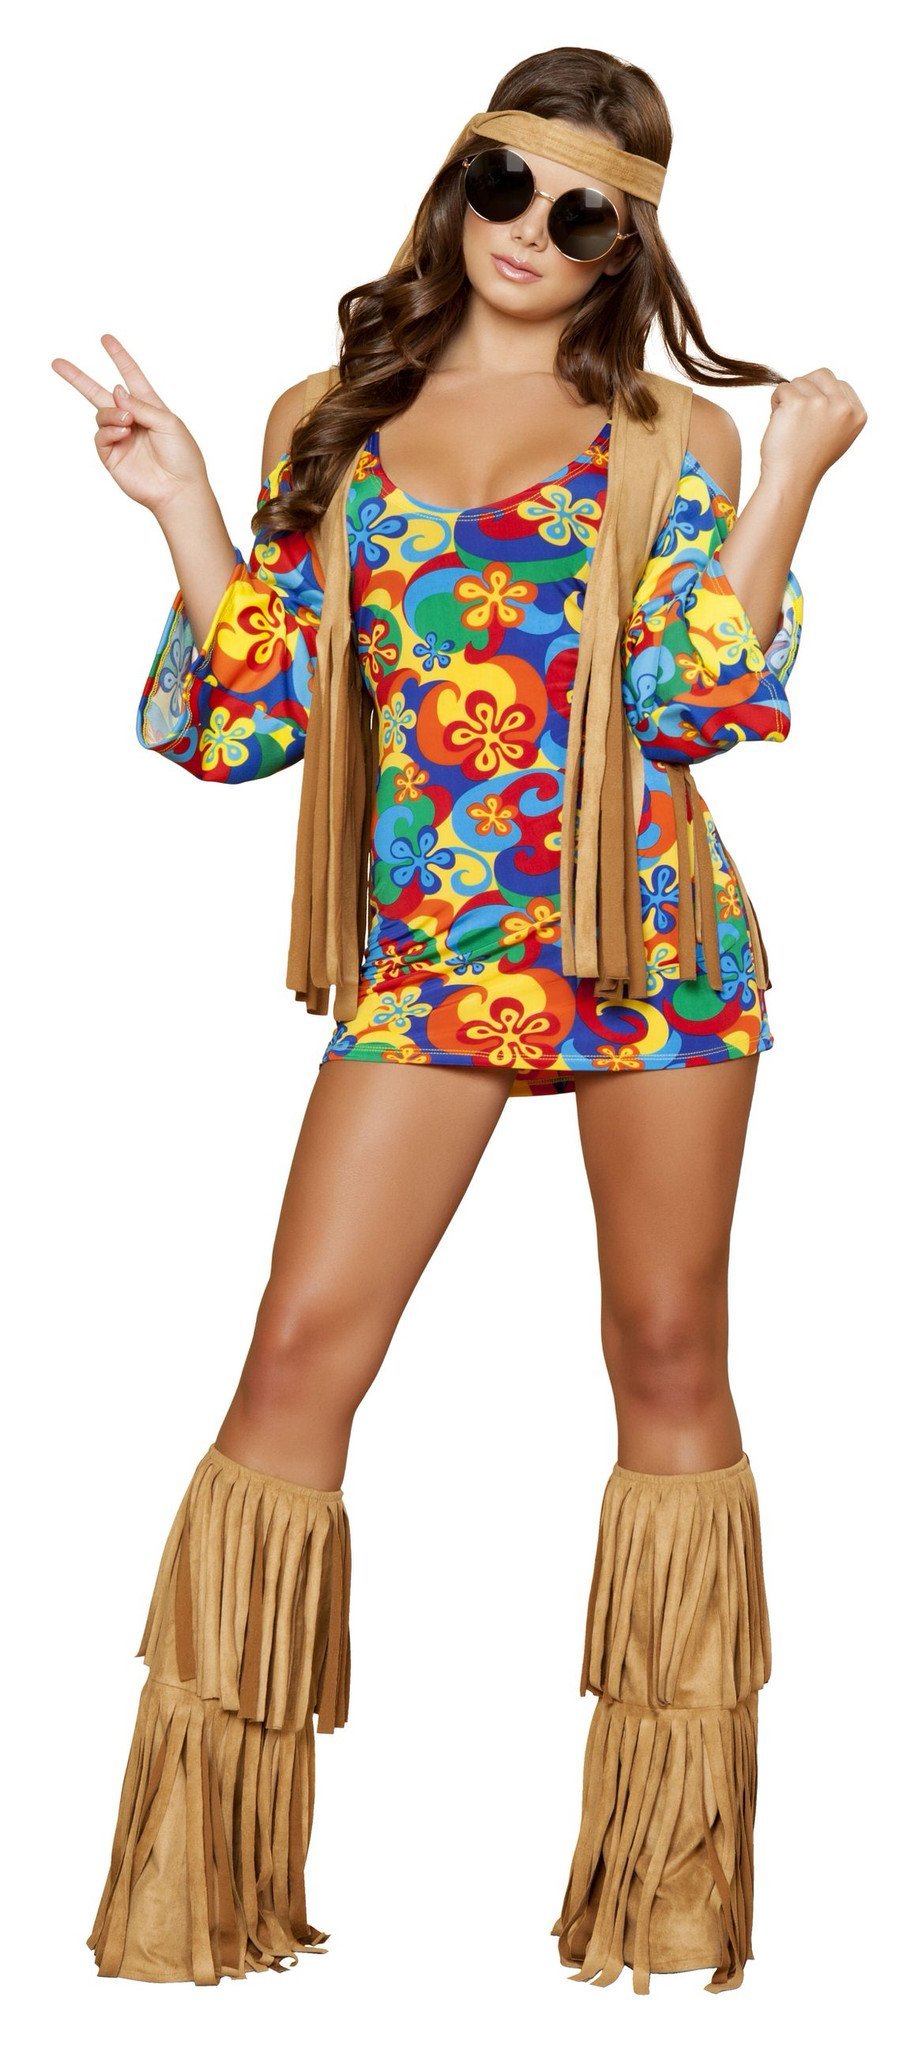 Buy 3pc Hippie Hottie Costume from RomaRetailShop for 64.99 with Same Day Shipping Designed by Roma Costume 4436-AS-S/M